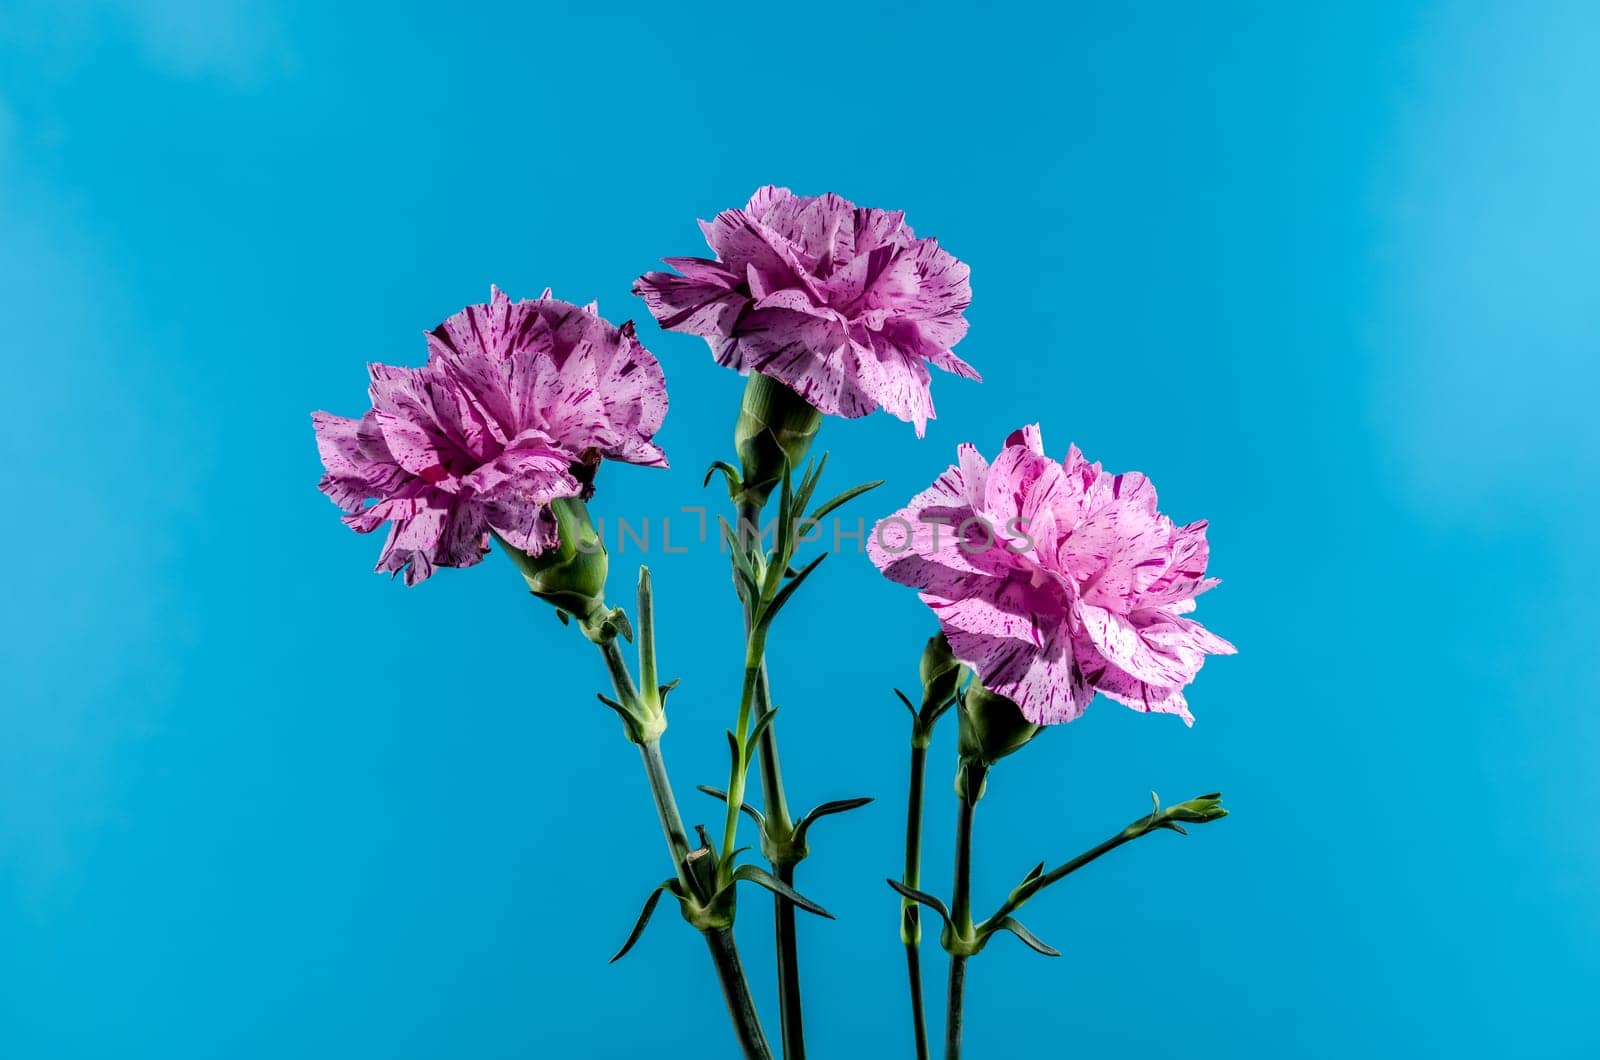 Beautiful blooming Pink carnations flowers isolated on a blue background. Flower head close-up.